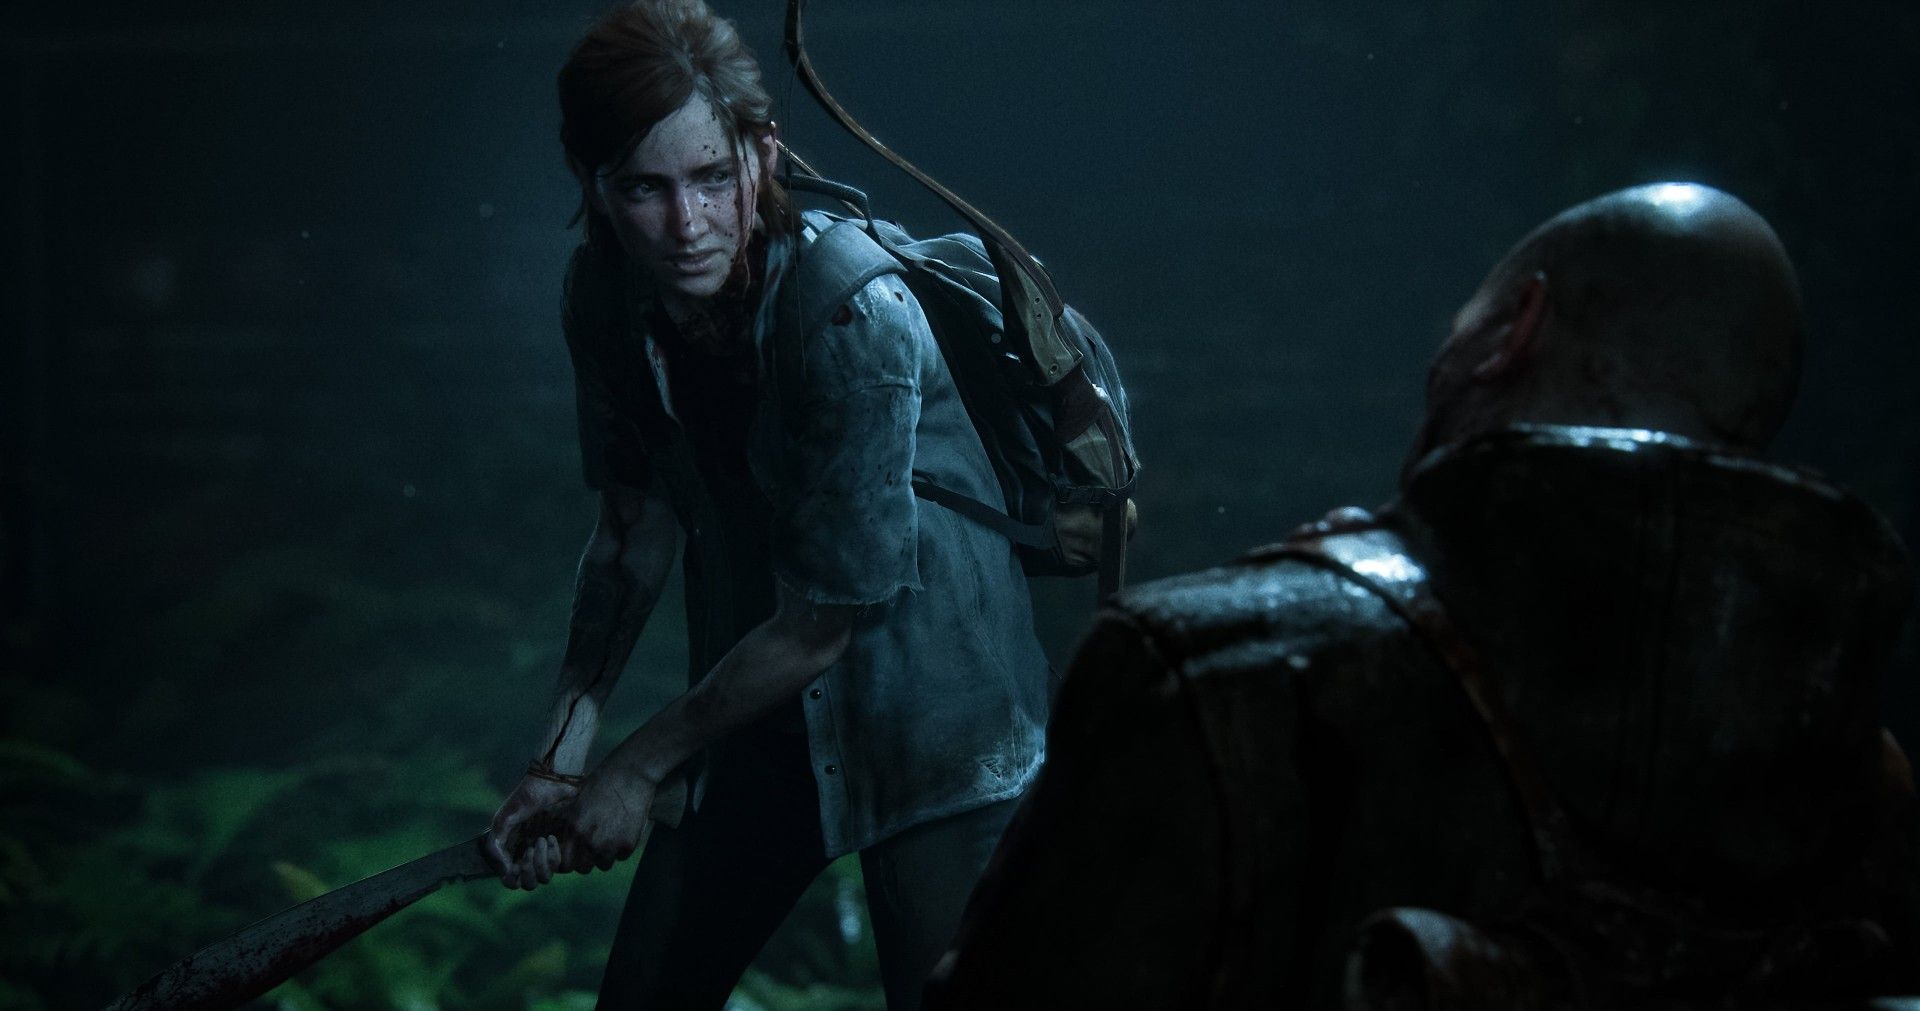 We're Not Extremely Passionate About” – Neil Druckmann Shares Why 'The Last  of Us Part 3' Isn't a Possibility - EssentiallySports